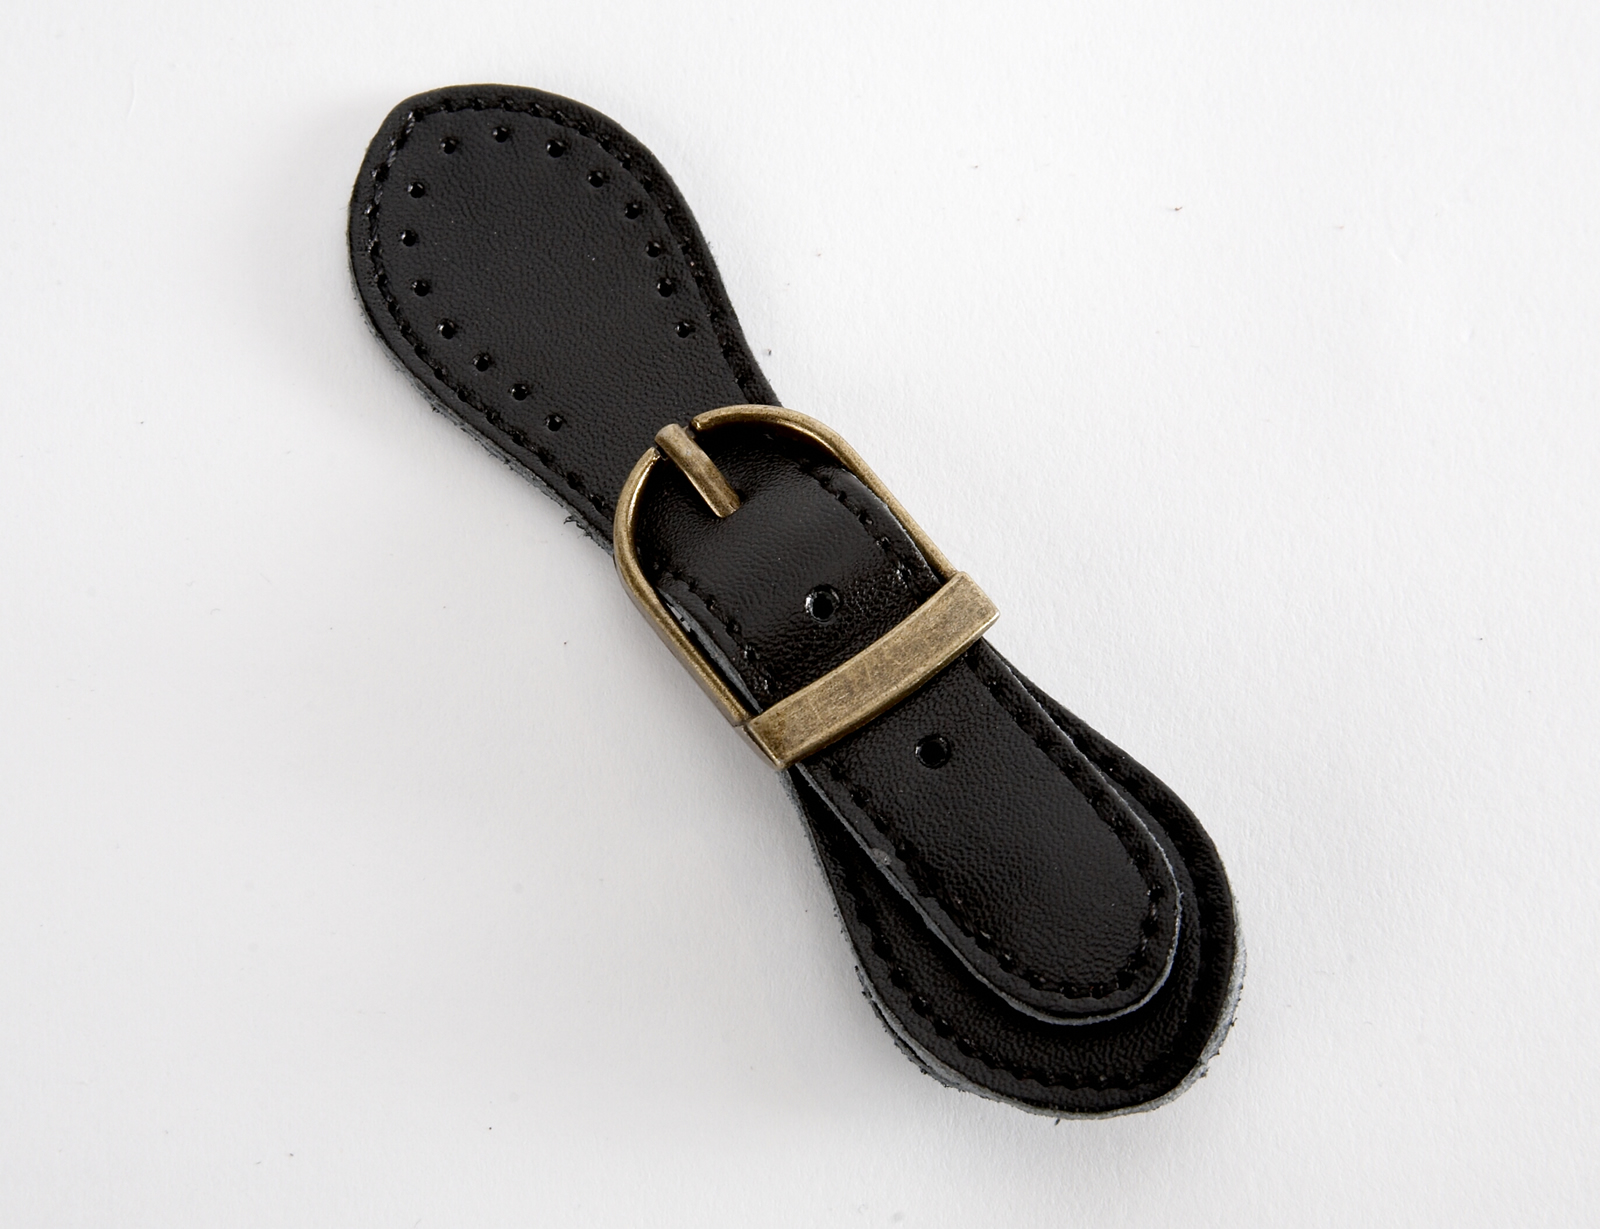 Leather Buckle Magnetic Snap - black